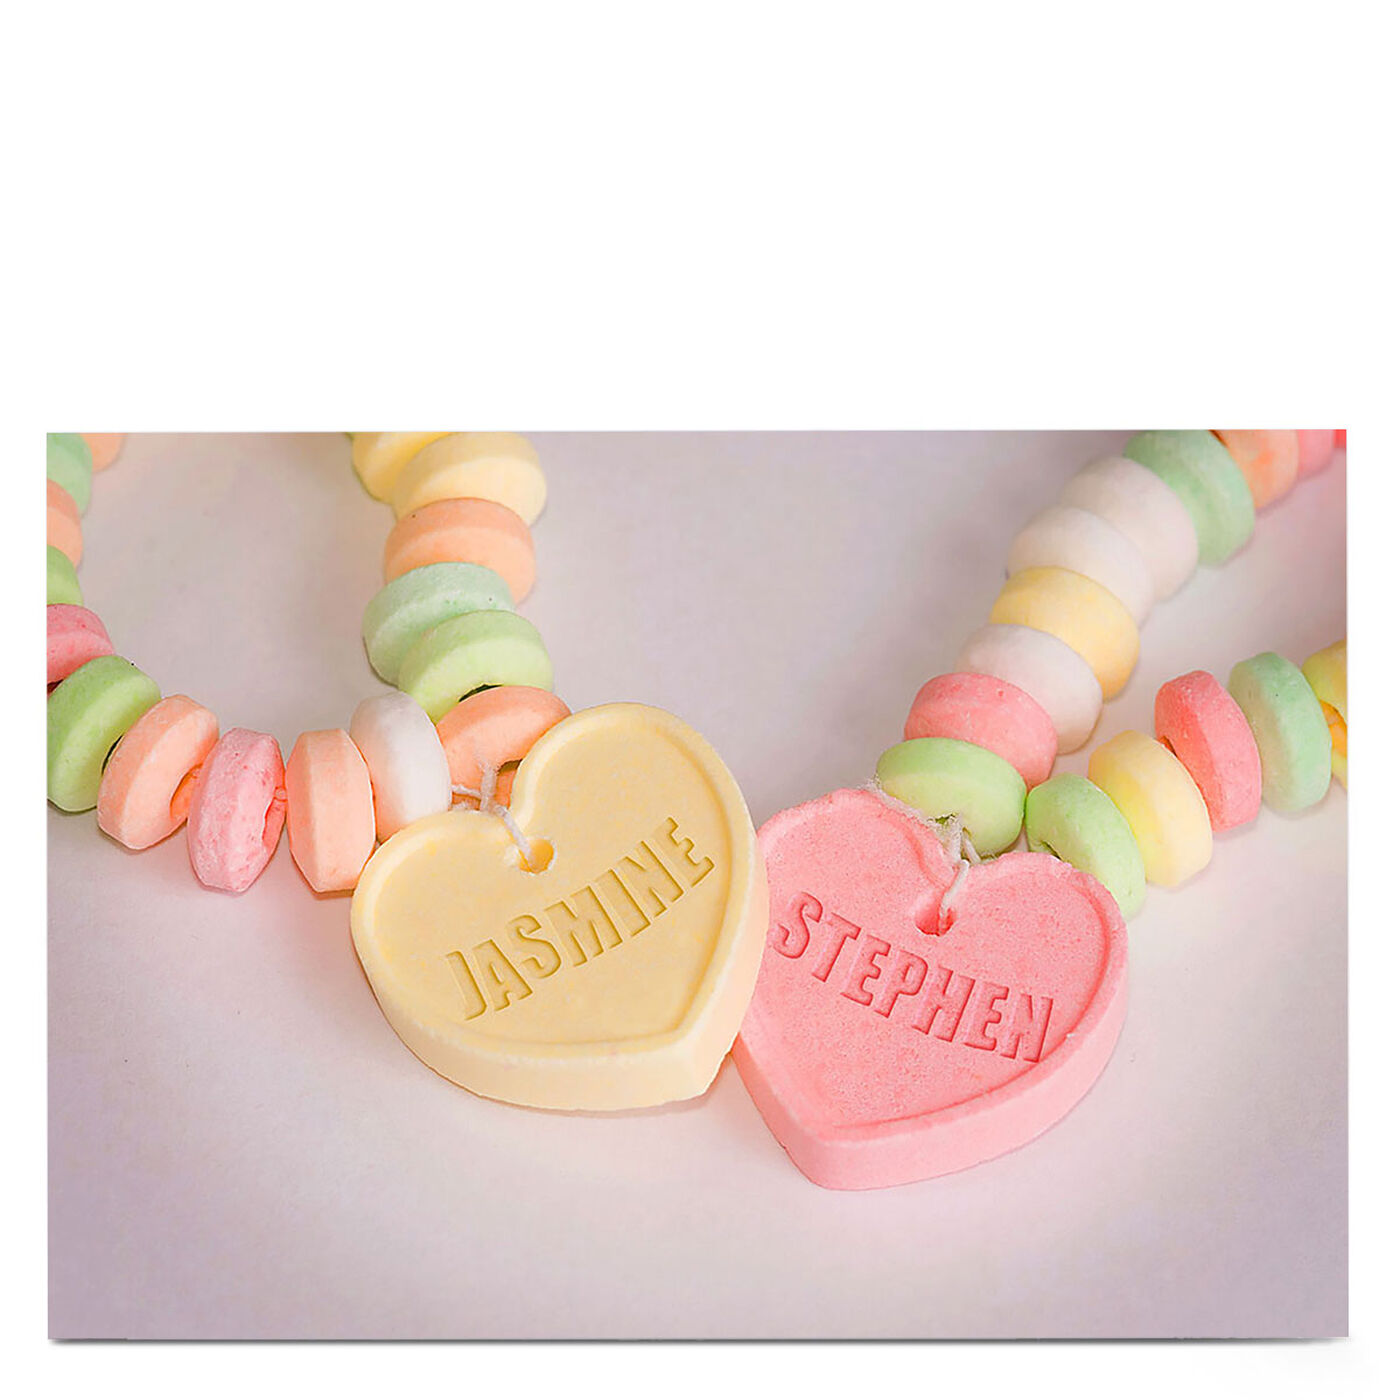 Buy Personalised Card - Candy Necklaces for GBP 1.79